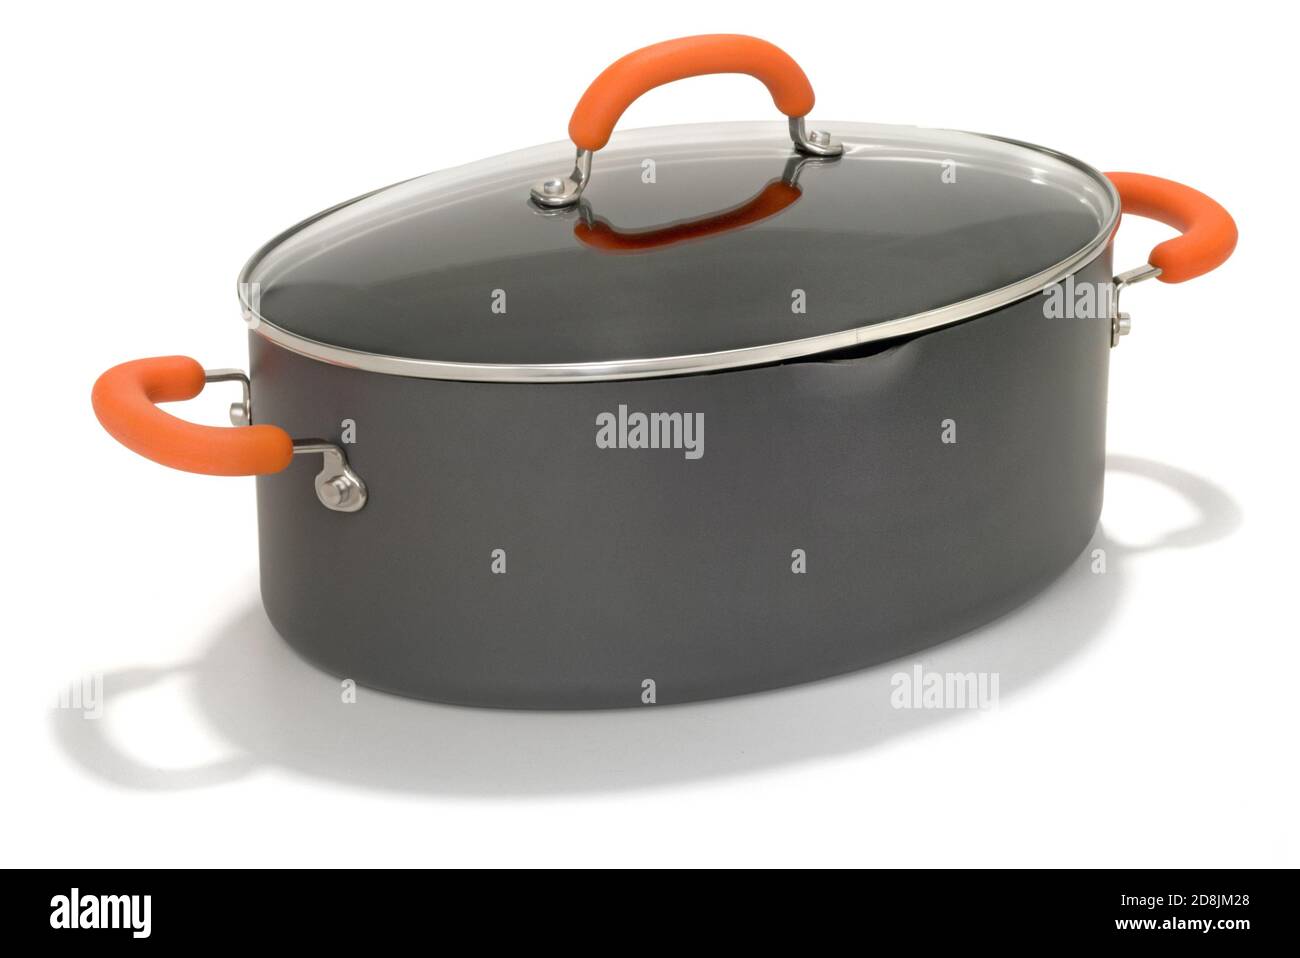 Oval shaped, non stick pasta pot with orange handles photographed on a  white background Stock Photo - Alamy